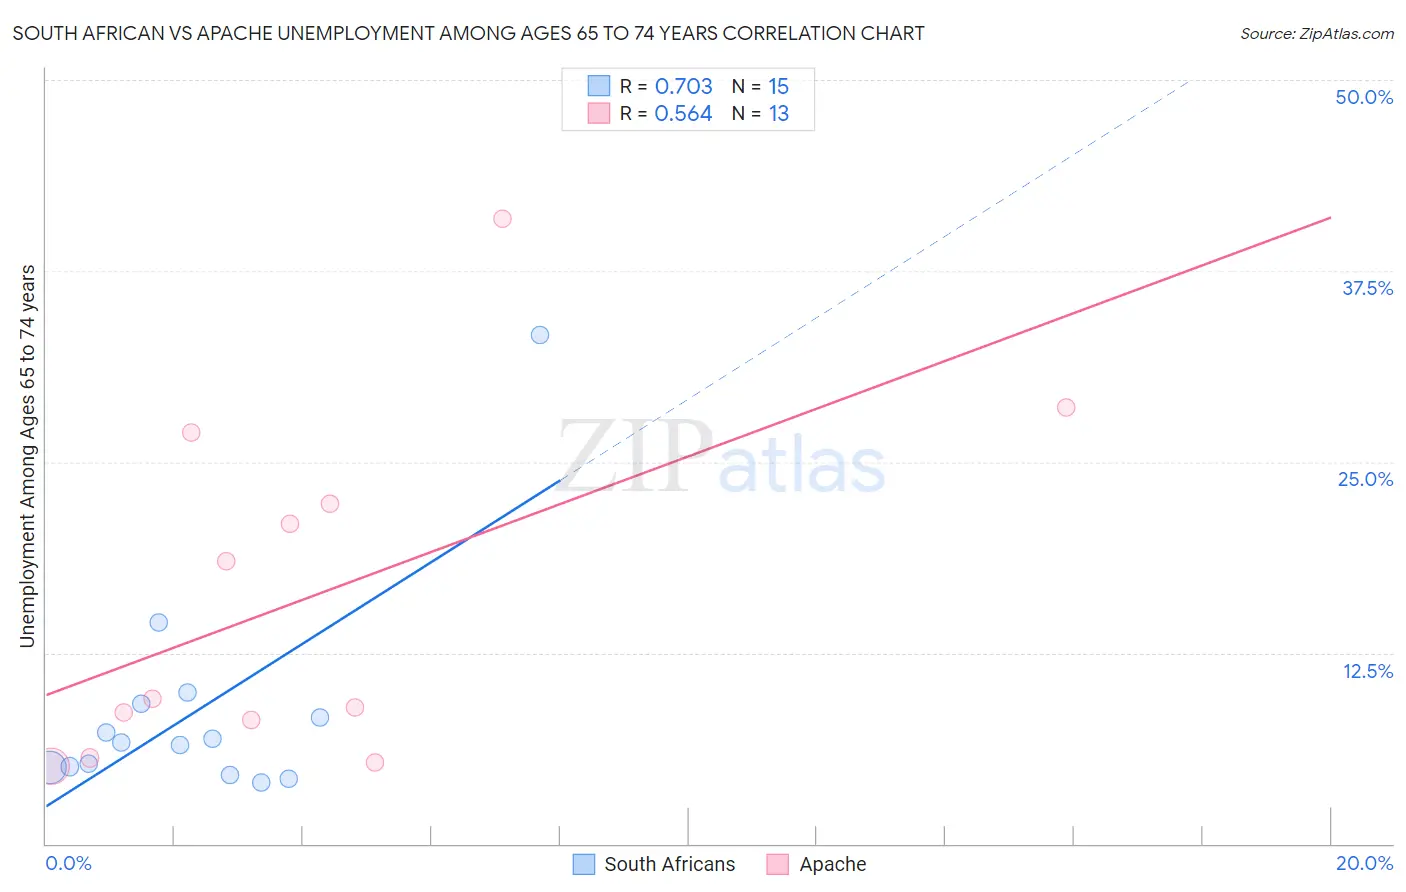 South African vs Apache Unemployment Among Ages 65 to 74 years